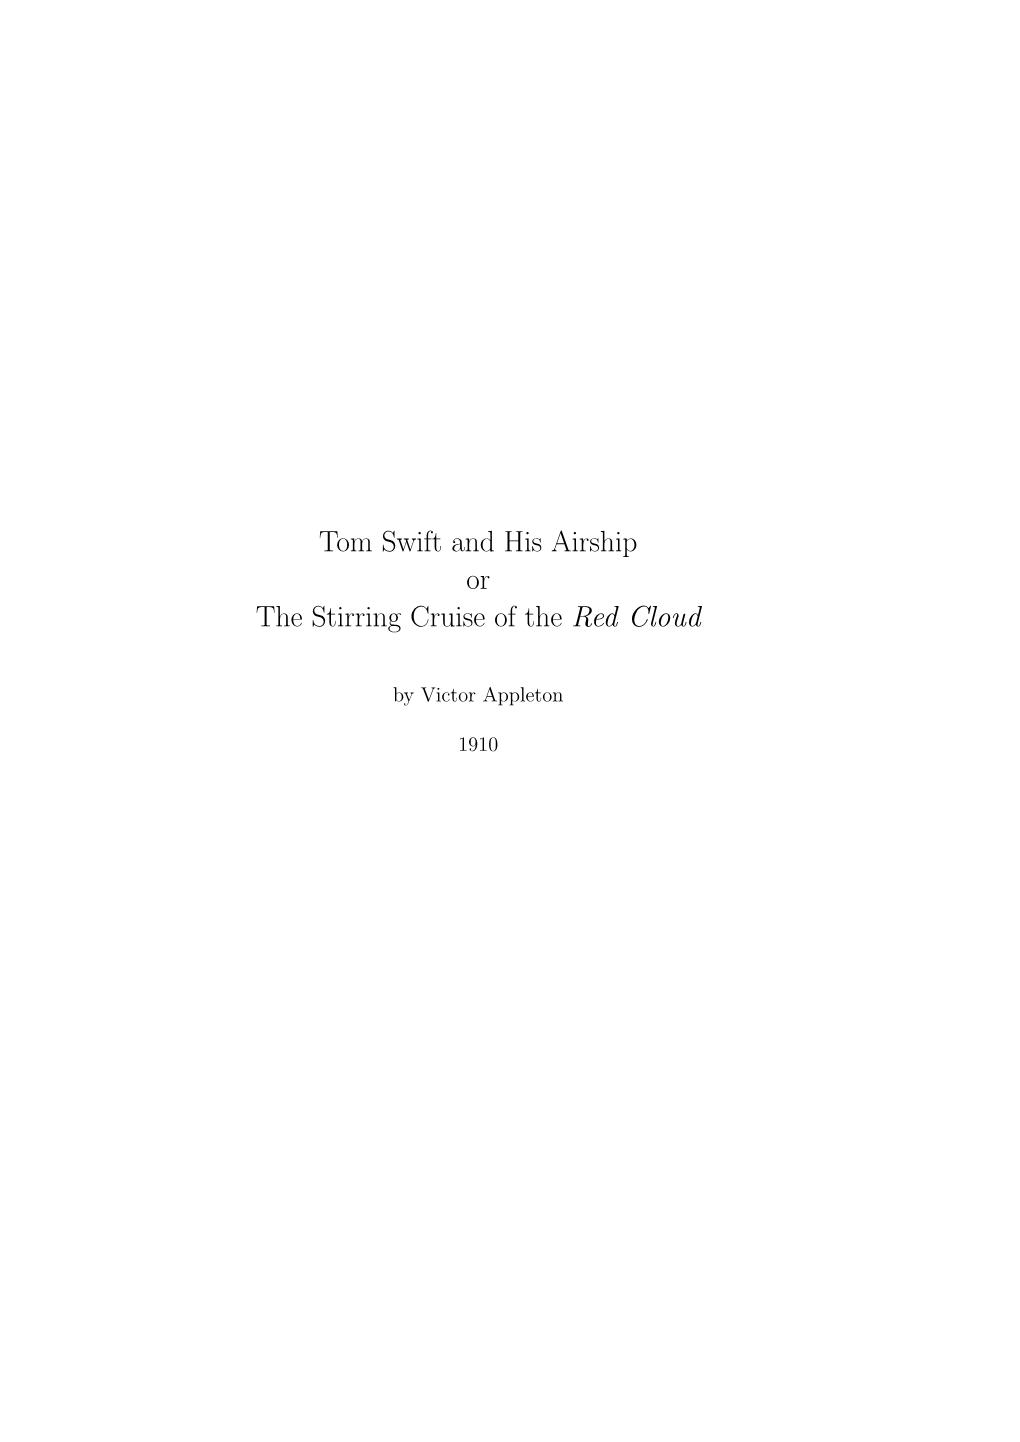 Tom Swift and His Airship Or the Stirring Cruise of the Red Cloud